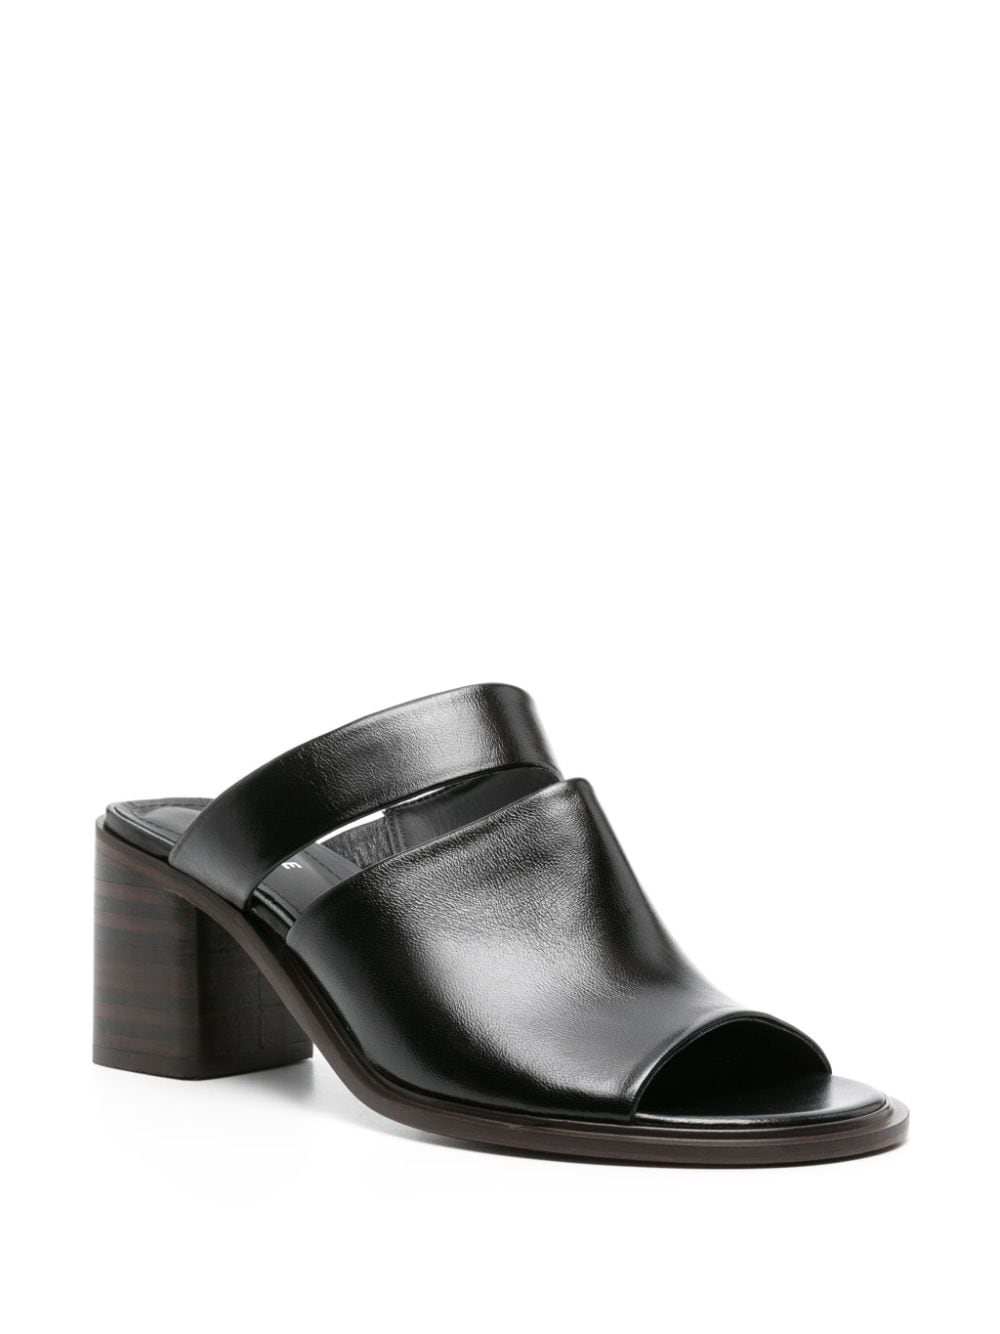 LEMAIRE Double Strap 55mm leather mules - Zwart